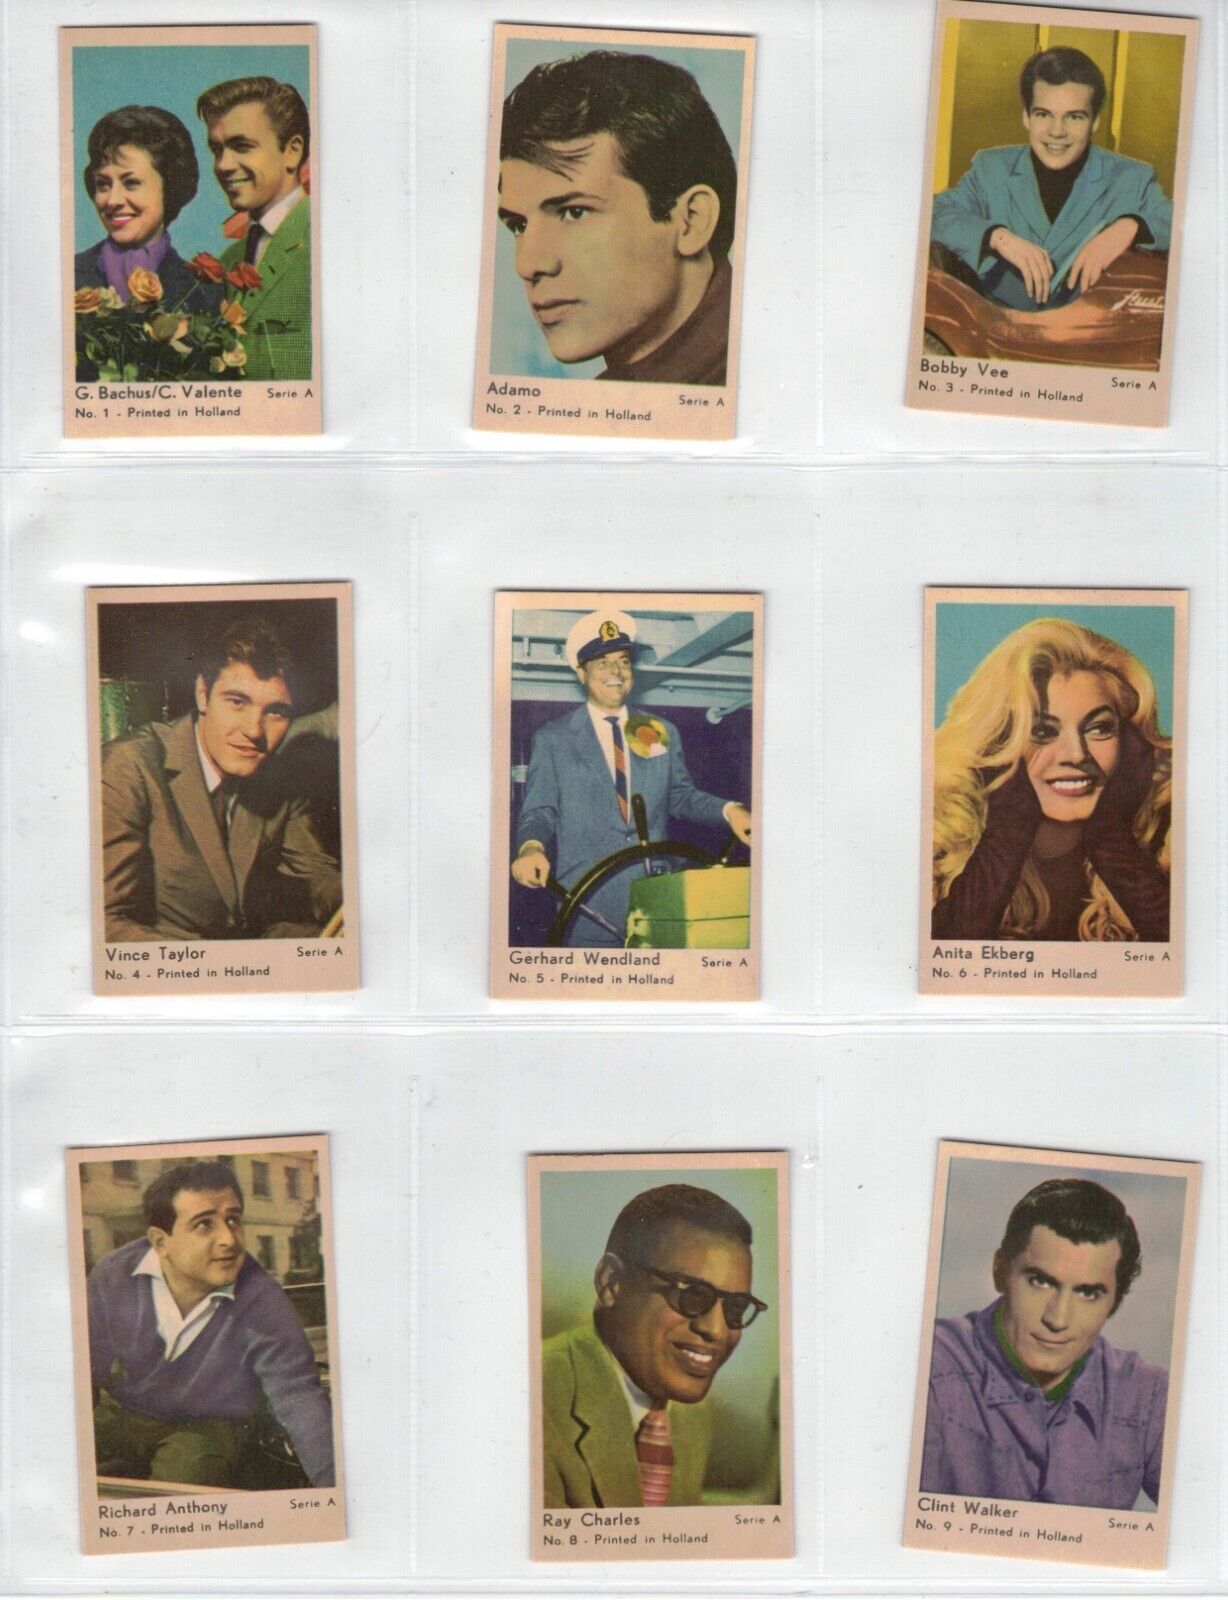 1964 DUTCH SERIE A (PRINTED IN HOLLAND) SET (99 CARDS) ALL STARS